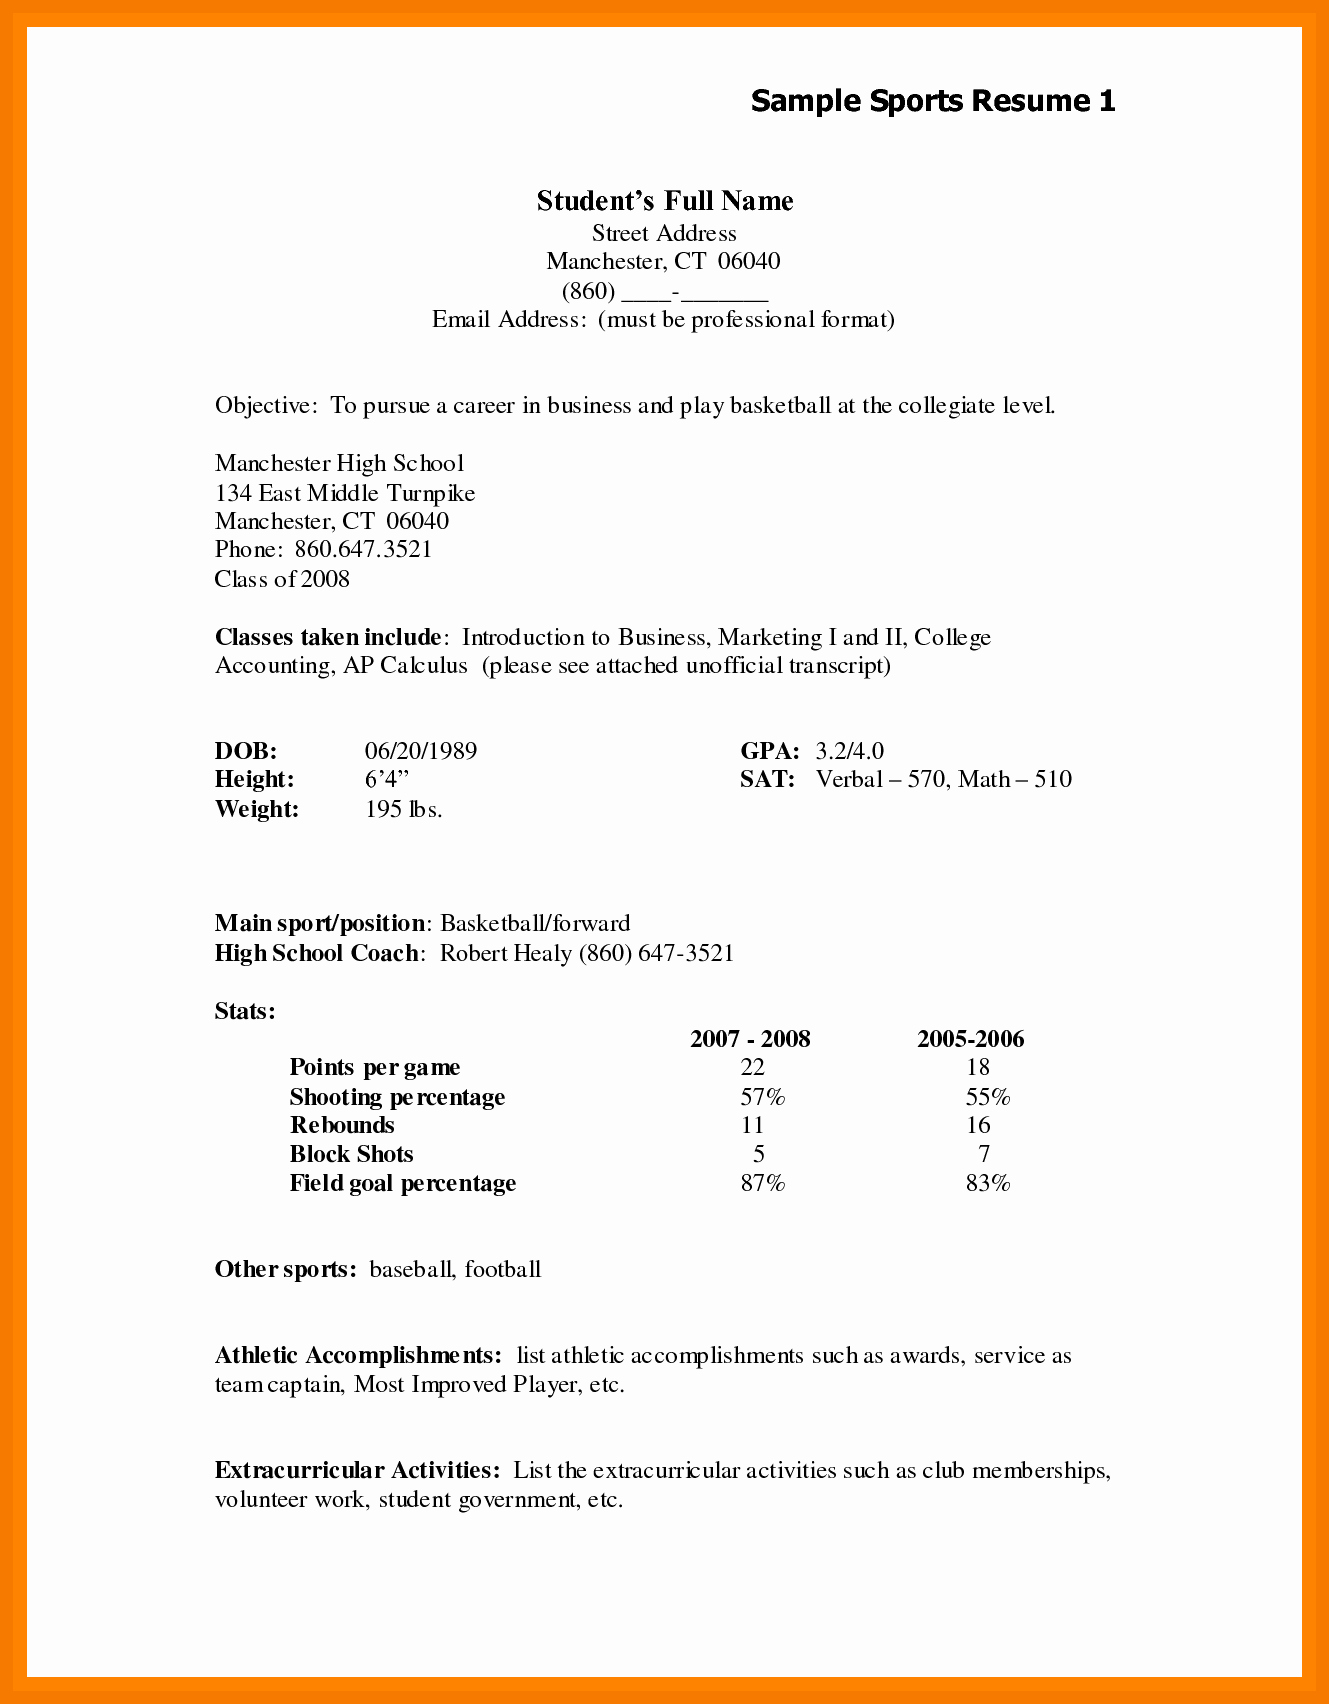 Resume Examples for Highschool Students Fresh 9 10 Sample Resume for Middle School Students